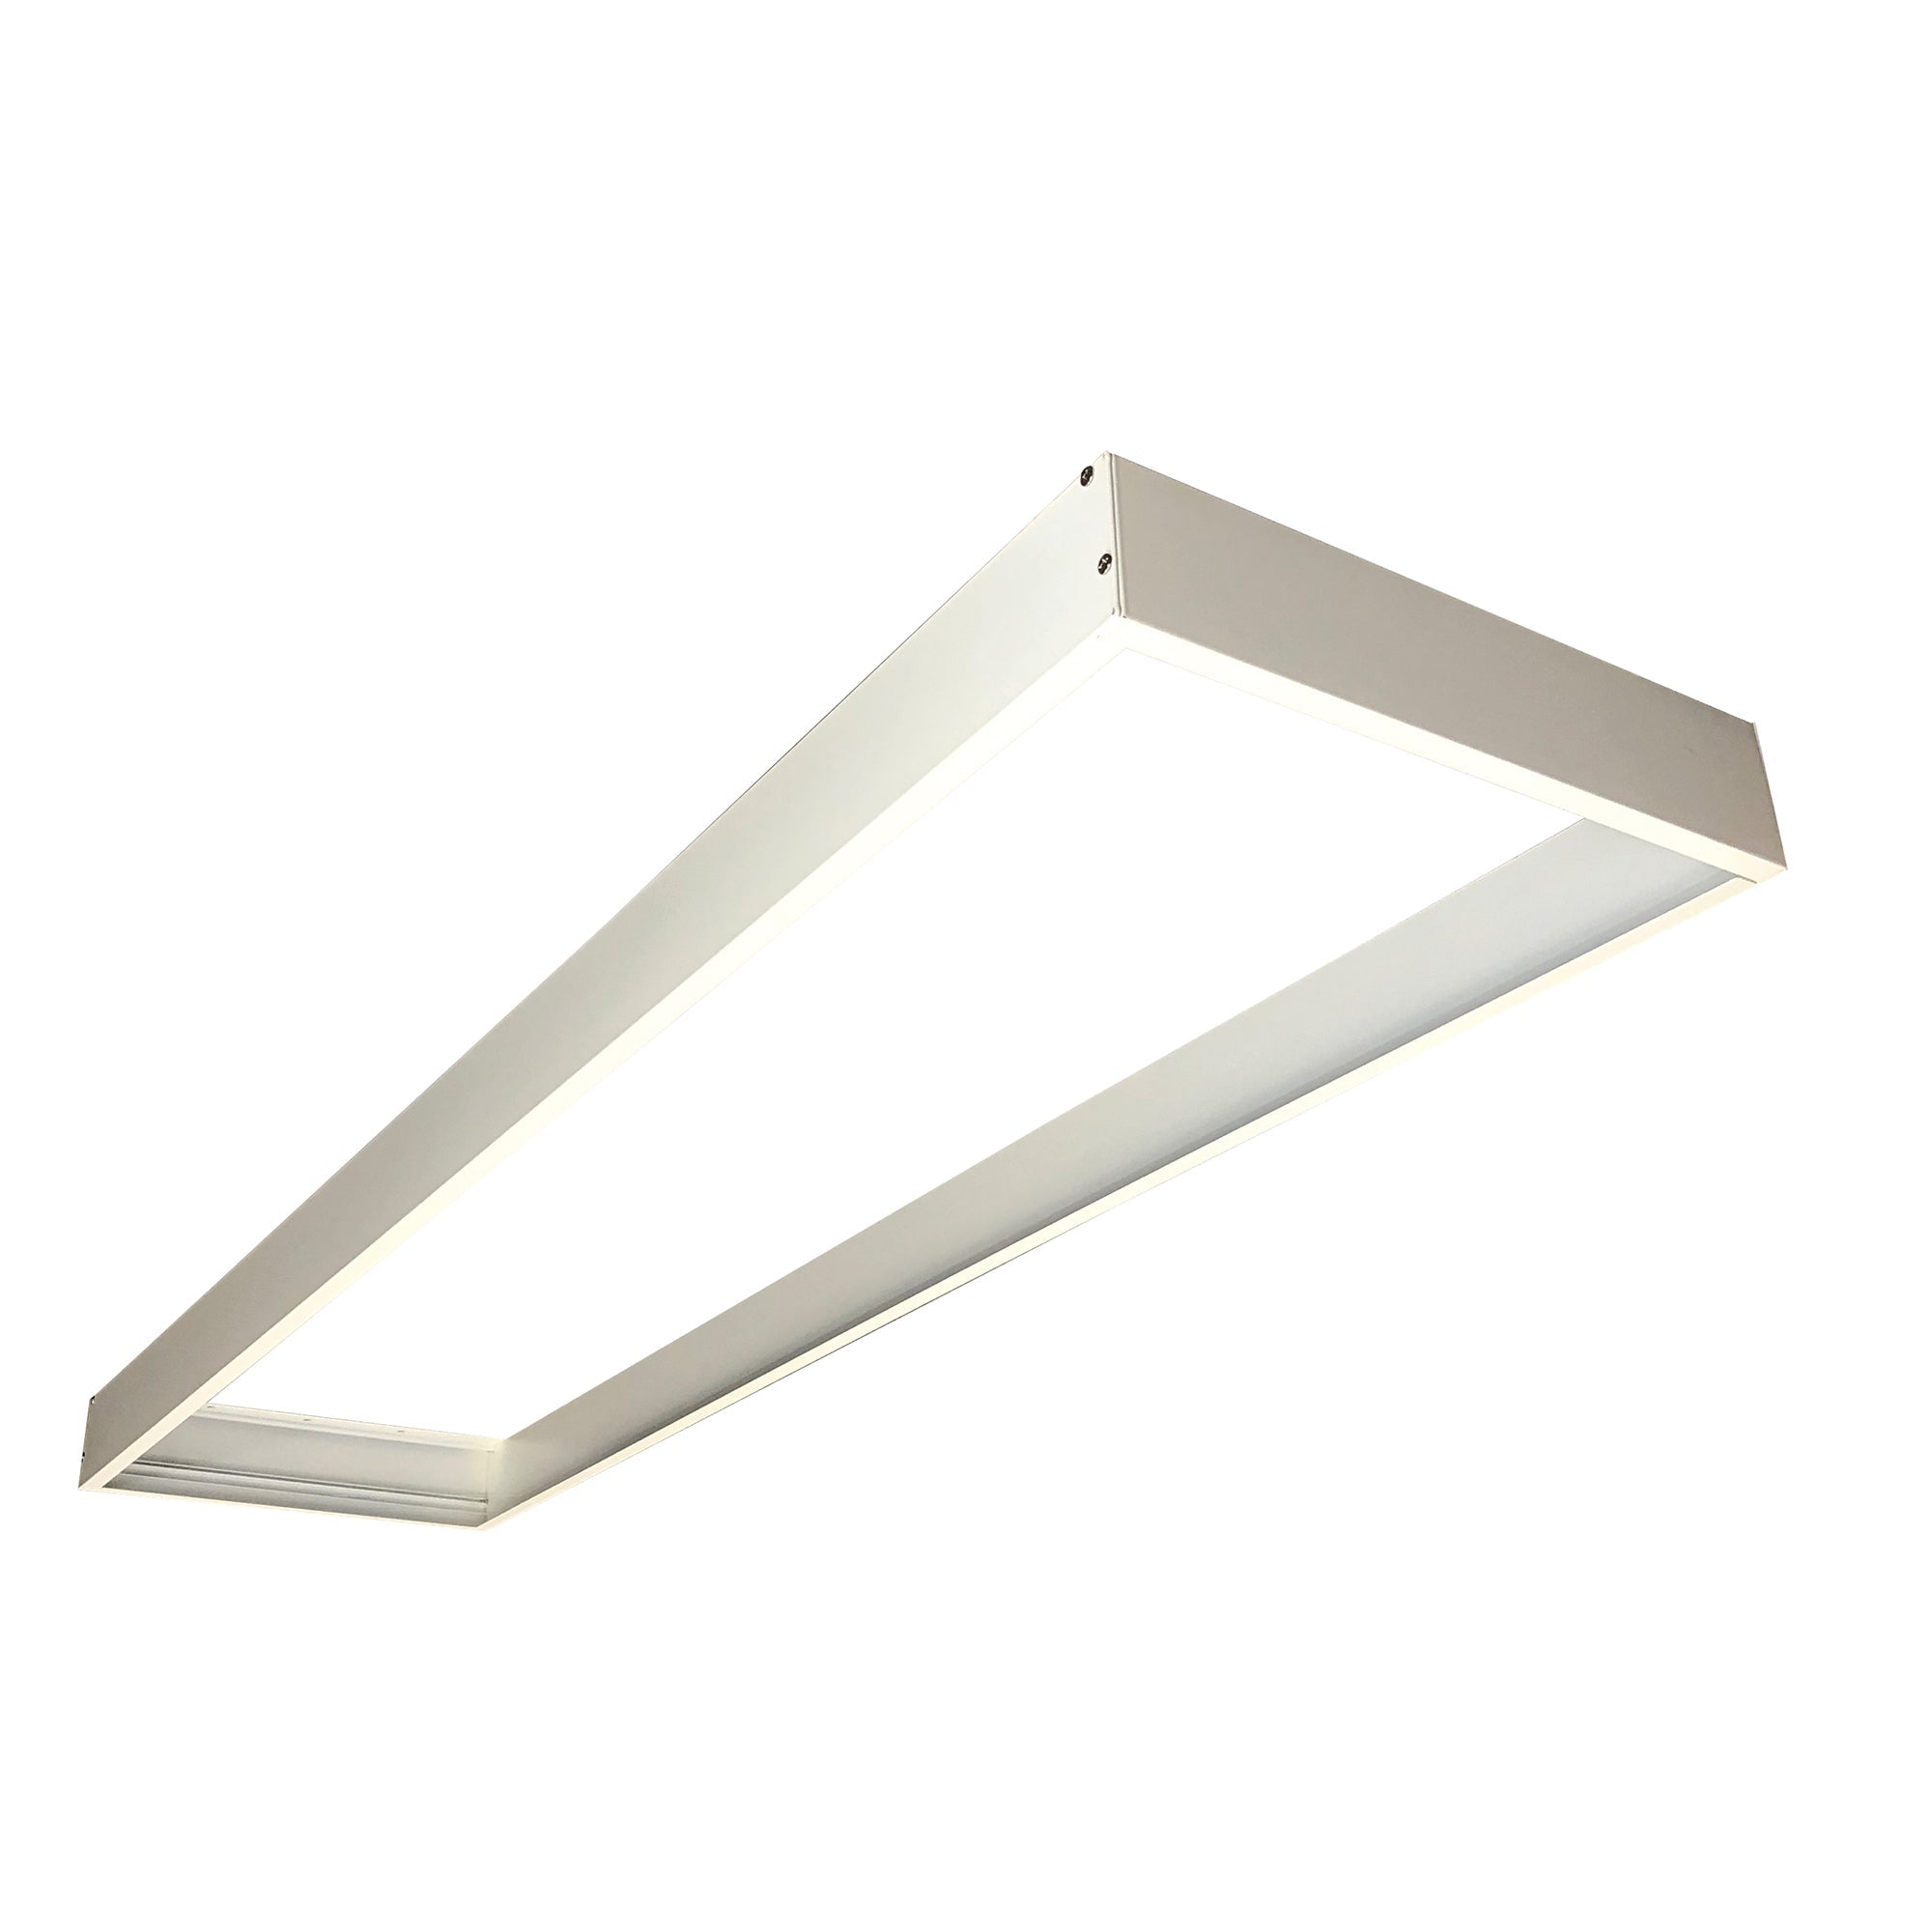 Nora Lighting NPDBL-14DFK/W - Recessed - Surface Mounting Frame for 1'x4' LED Backlit Panels